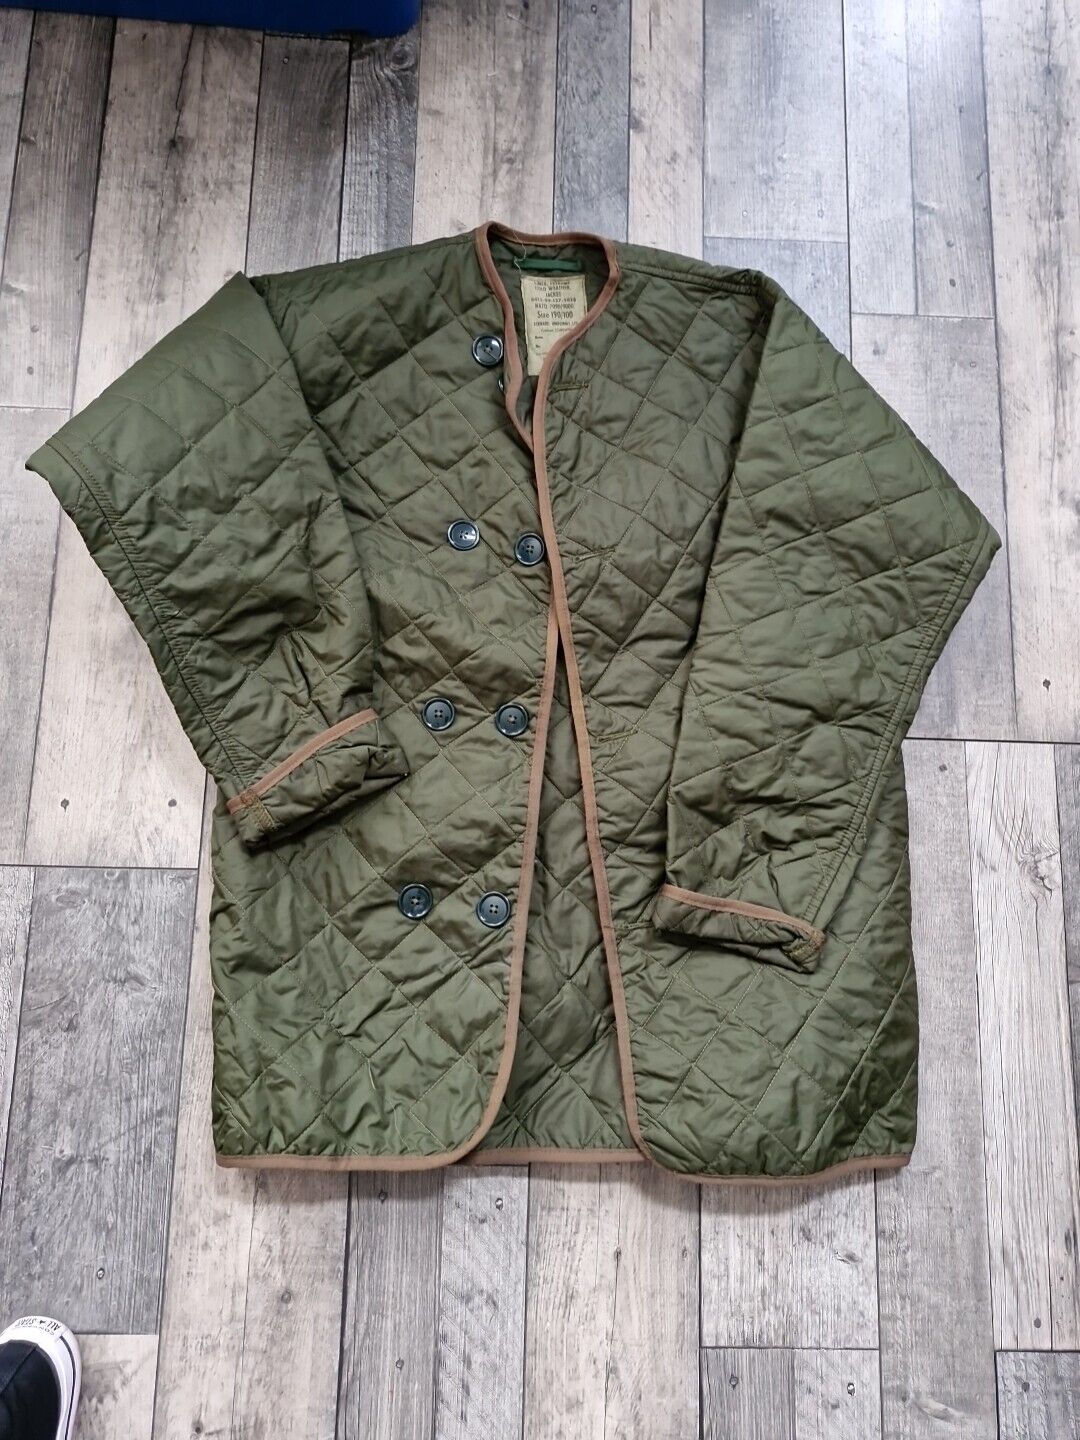 British Army Issue Parka Jacket Liner Large Shooting Hunting Green Padded Warm